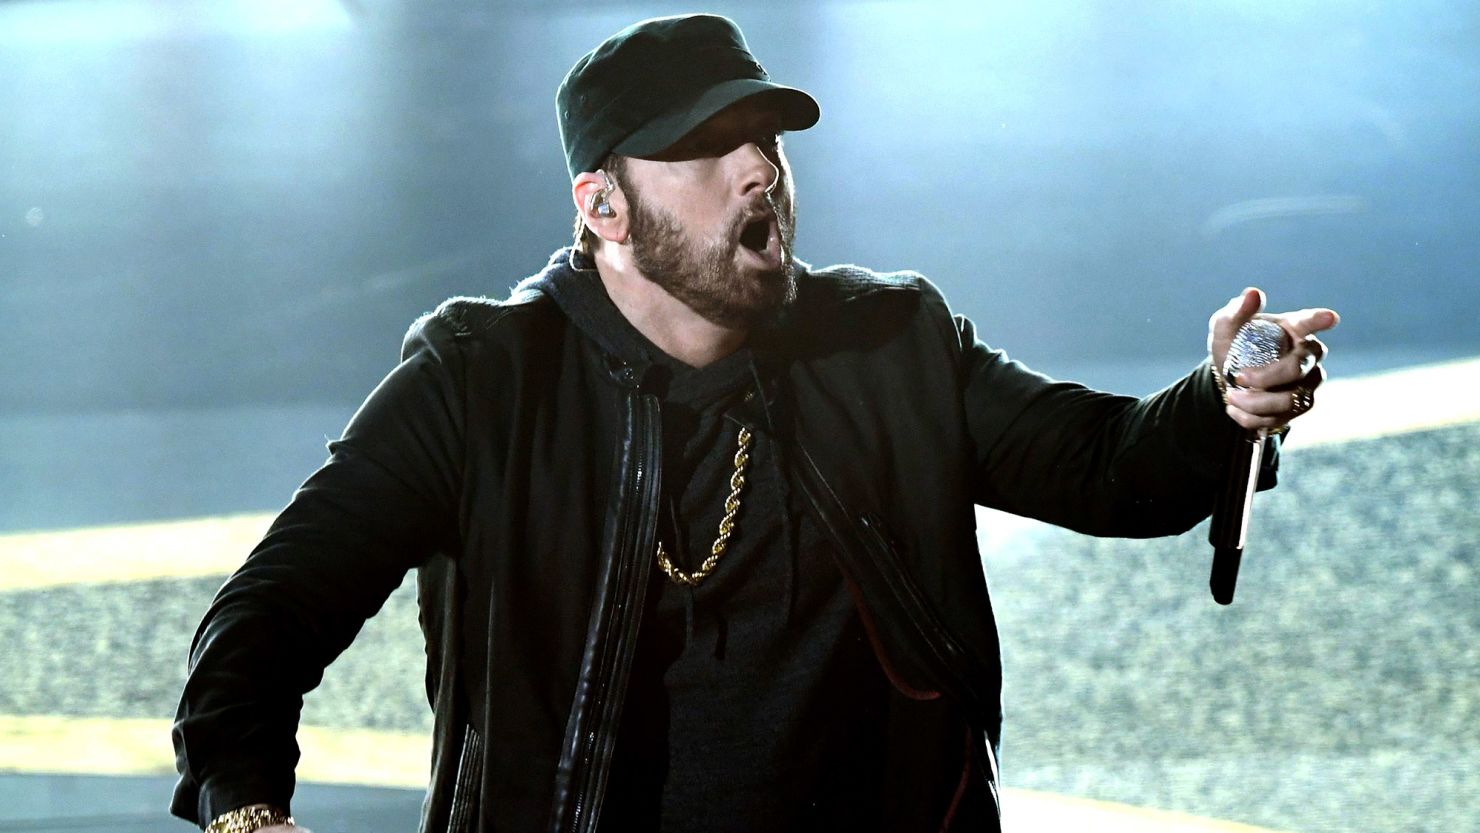 Eminem dropped a new music video with a debut clip that left his fans scratching their heads. 